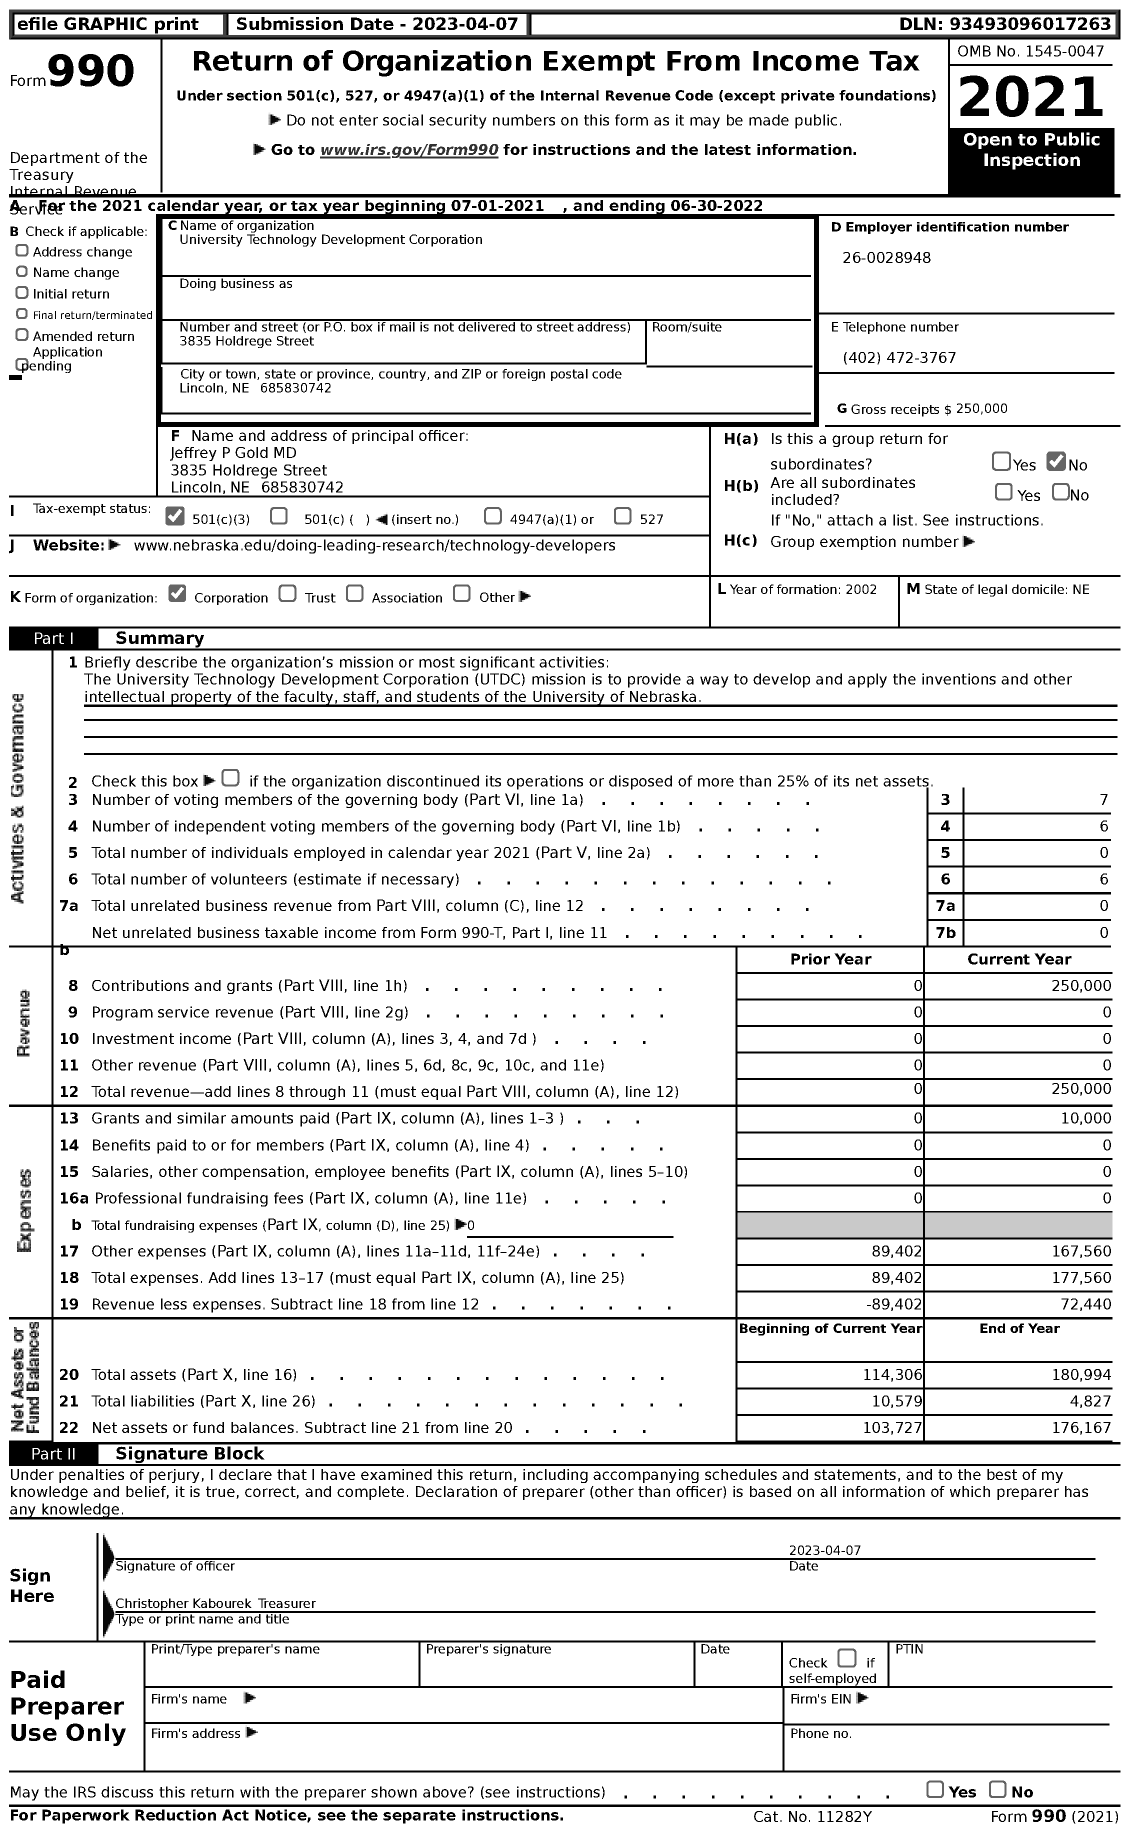 Image of first page of 2021 Form 990 for University Technology Development Corporation